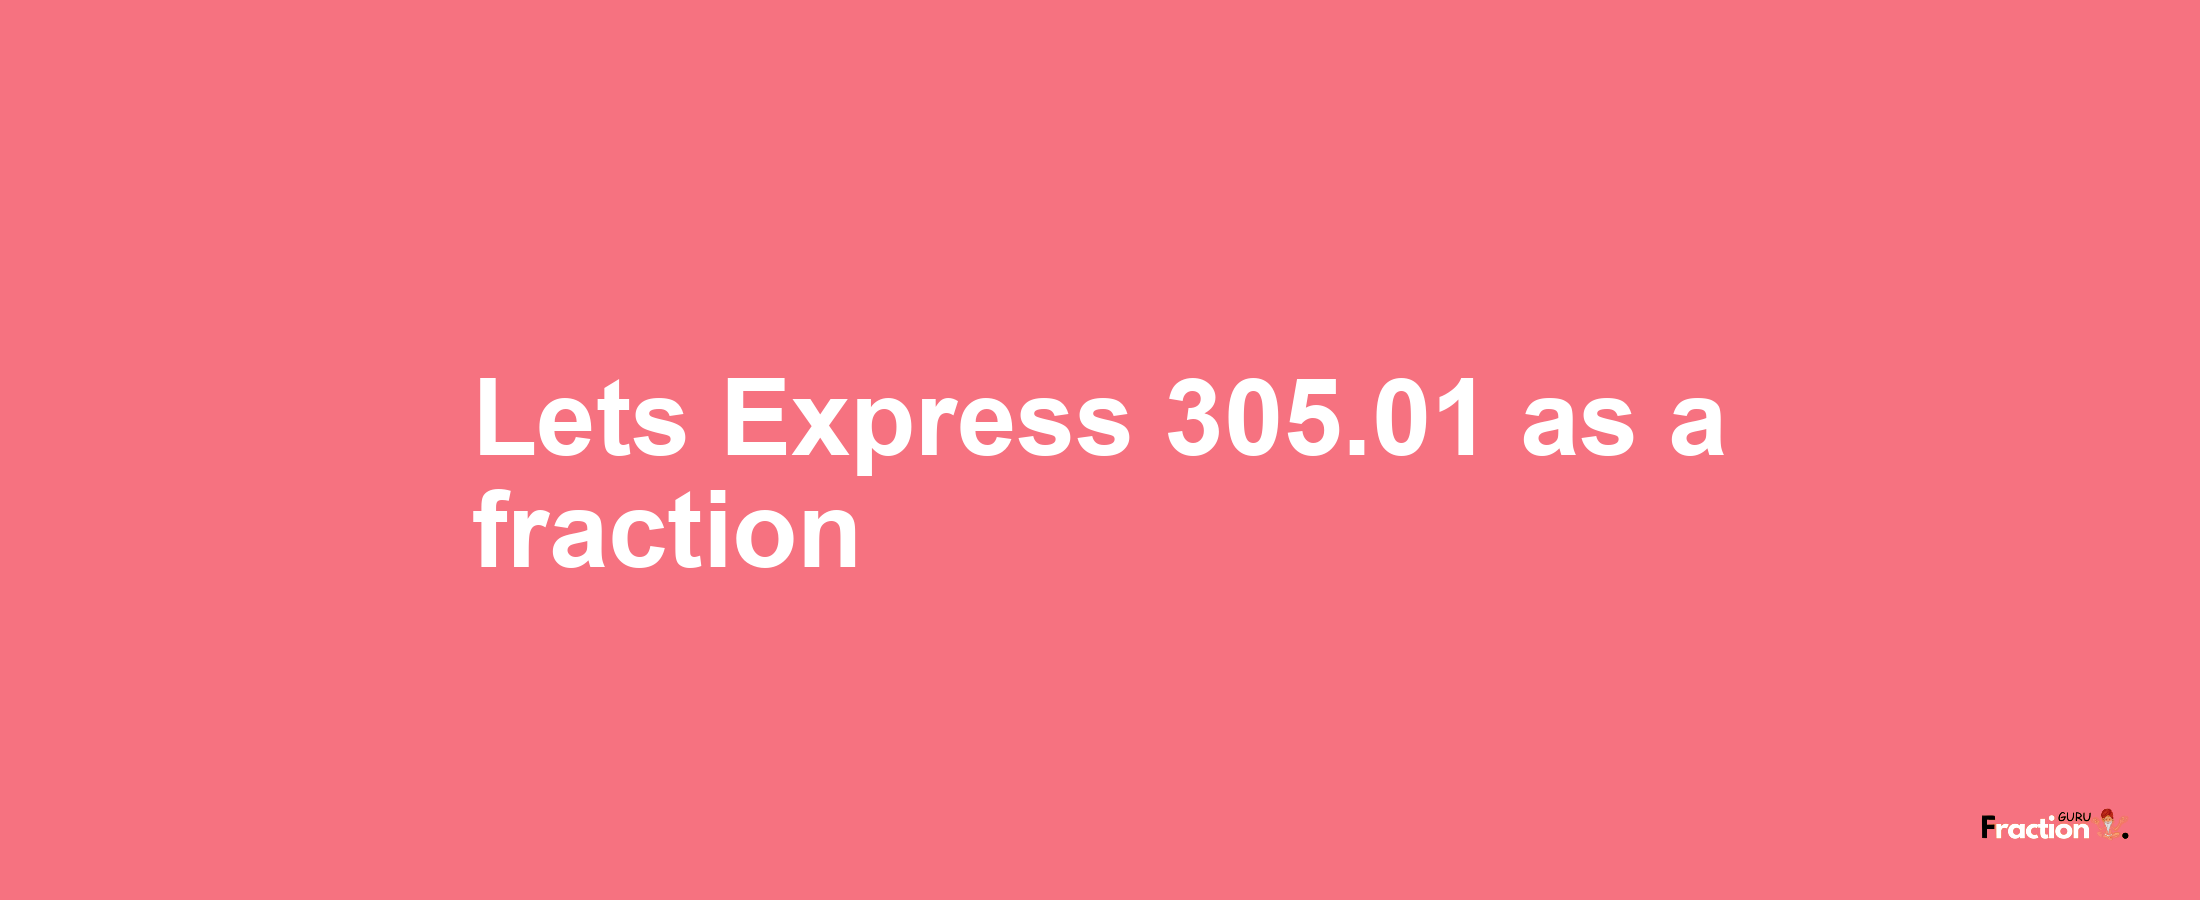 Lets Express 305.01 as afraction